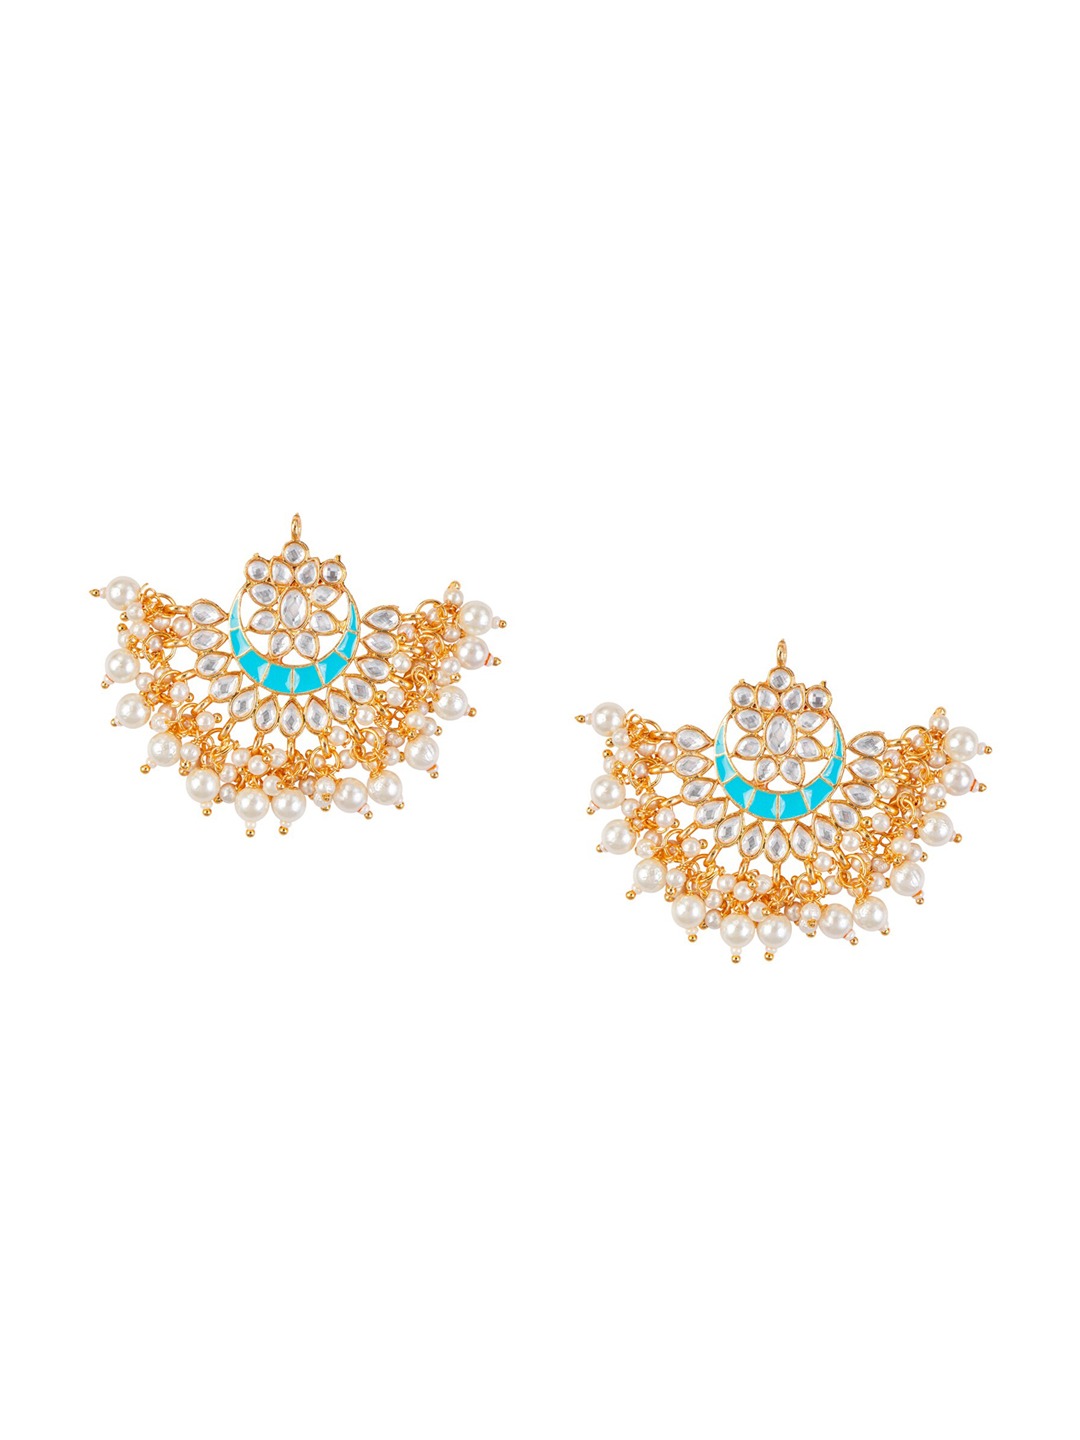 Women's Blue & Gold-Toned Contemporary Chandbalis Earrings - Morkanth